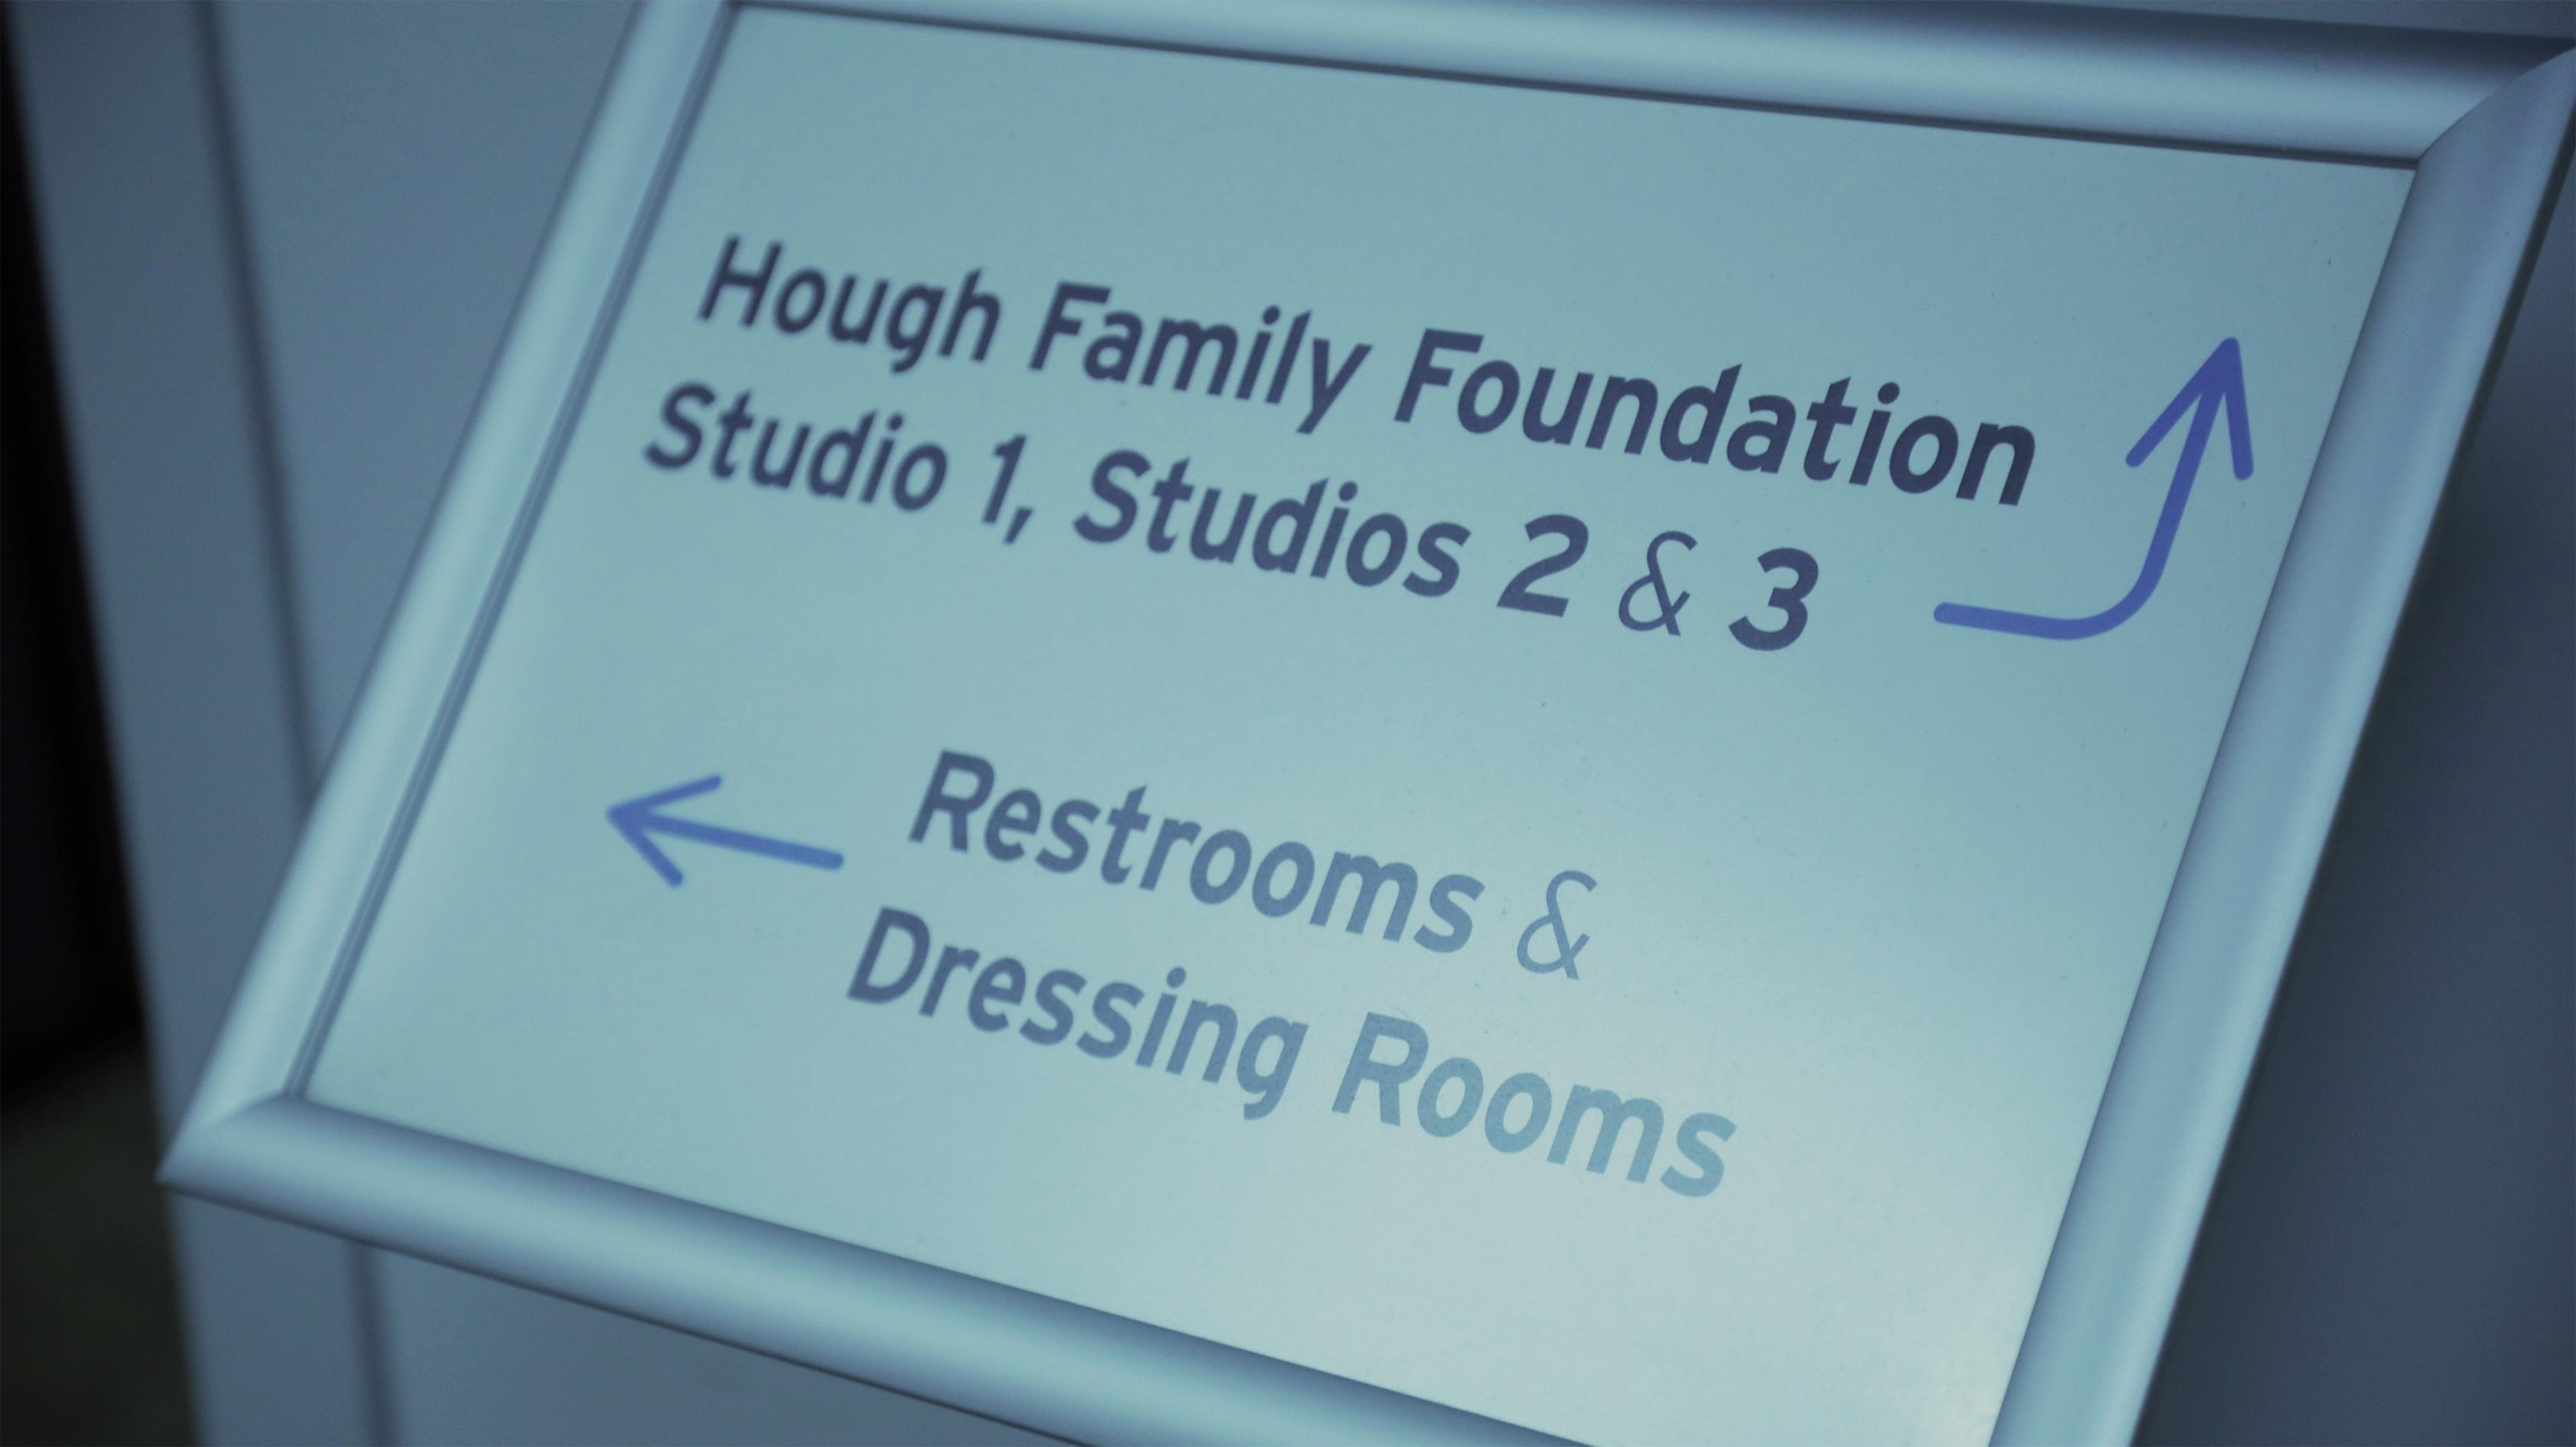 WEDU Studios & Facilities - Hough Family Foundation Studio 1, Studios 2 and 3, Restrooms and Dressing Rooms